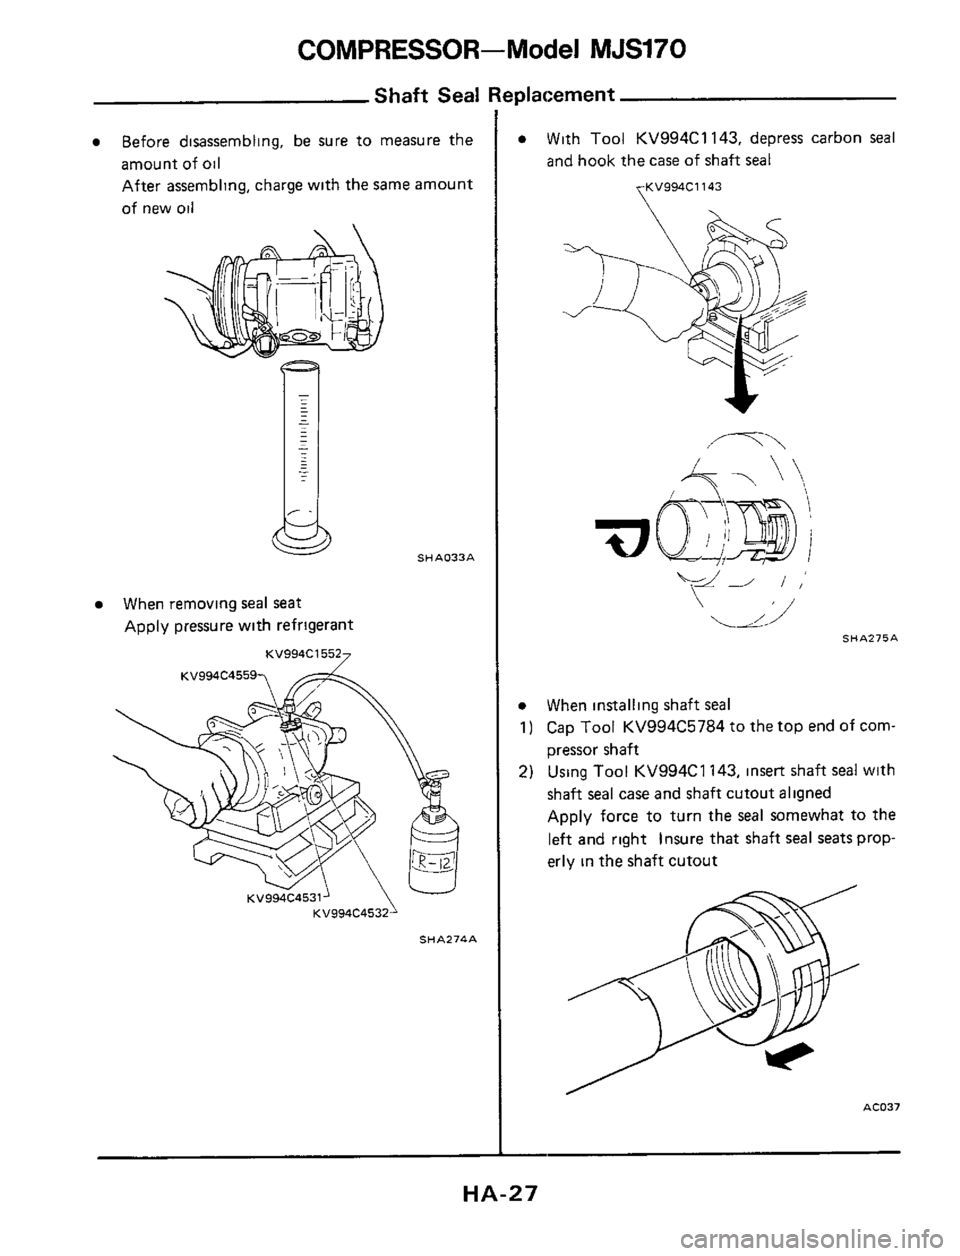 NISSAN 300ZX 1984 Z31 Heather And Air Conditioner Workshop Manual COMPRESSOR-Model MJS170 
Shaft Seal Replacement 
Before  disassembling,  be  sure to measure  the 
amount  of 
oil 
After assembling, charge  with the same  amount 
of  new  oil 
When  removing seal s